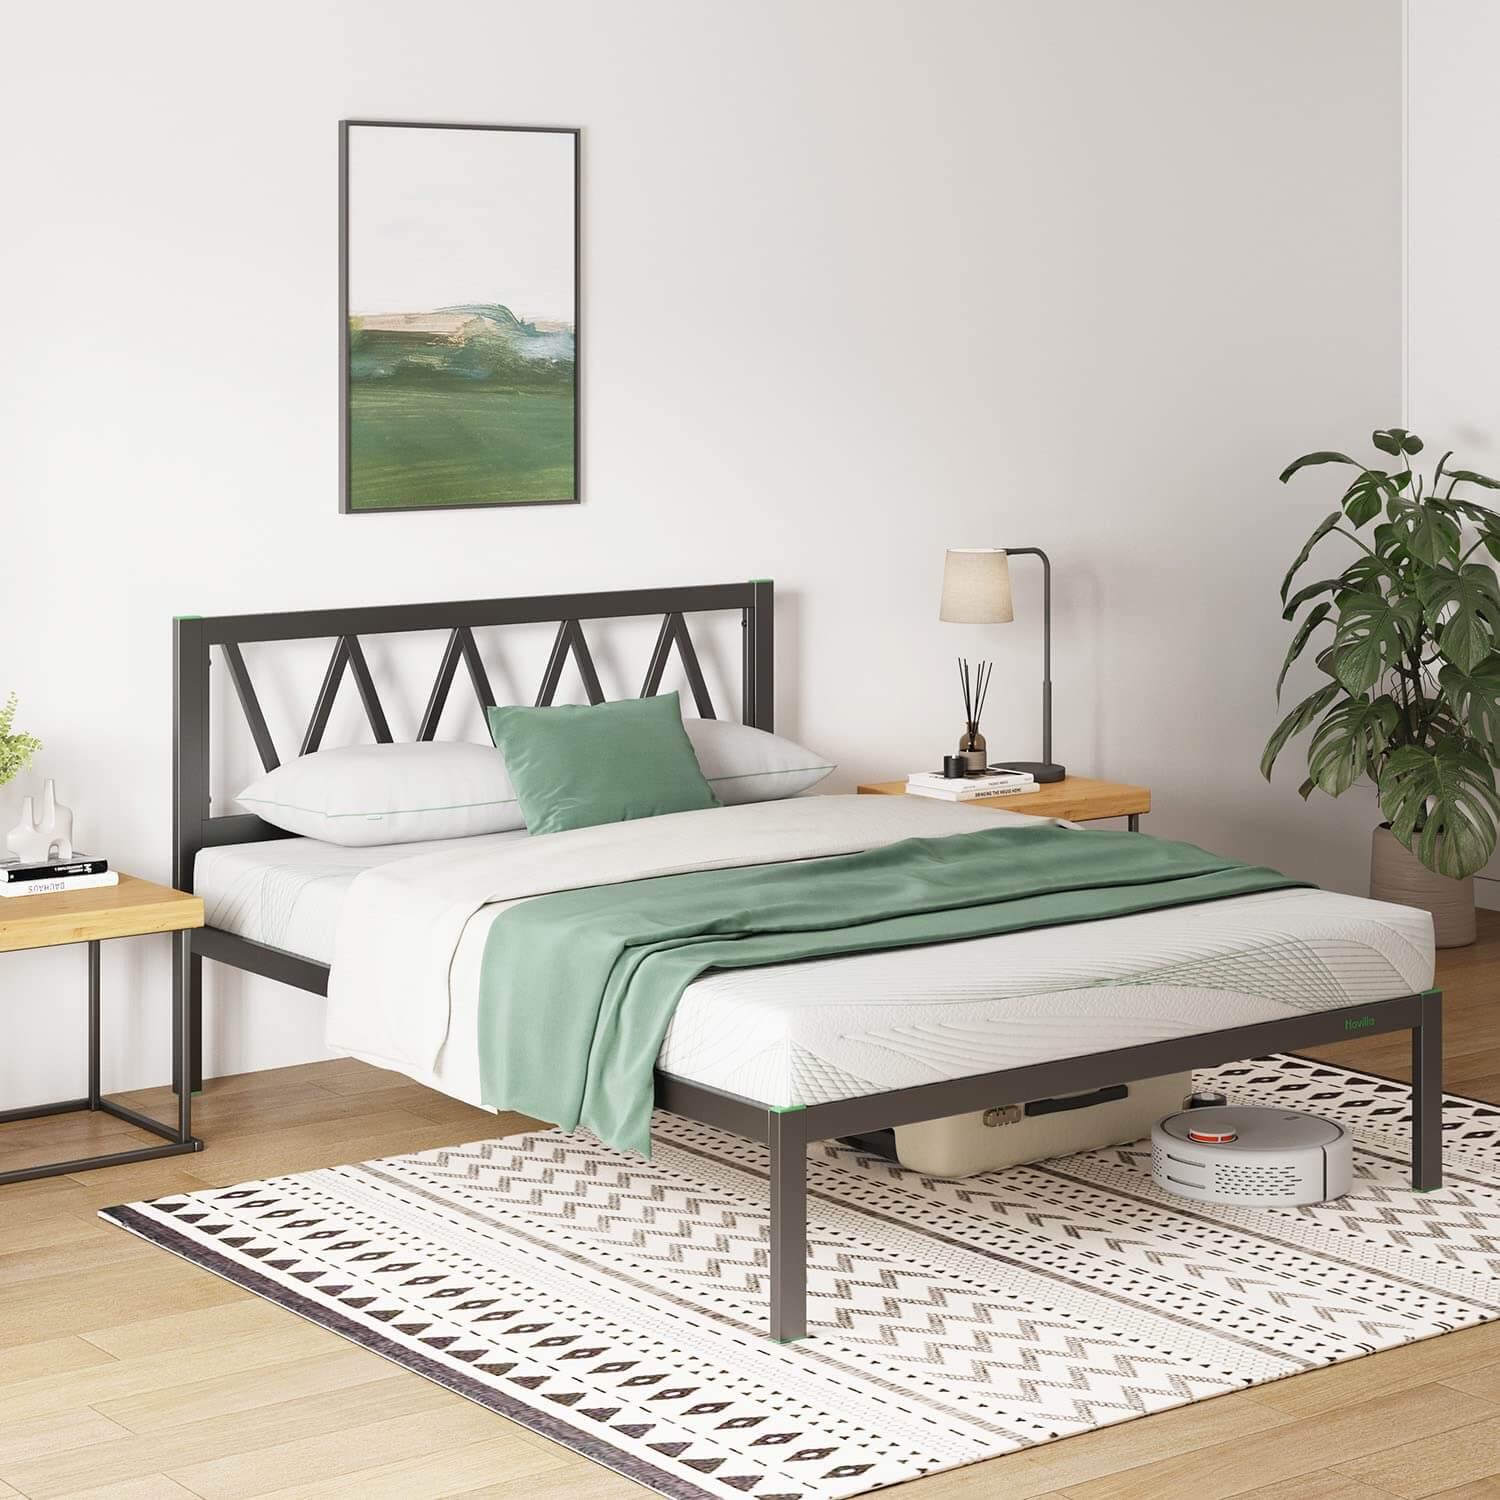 Concise Metal Bed Frame with Headboard